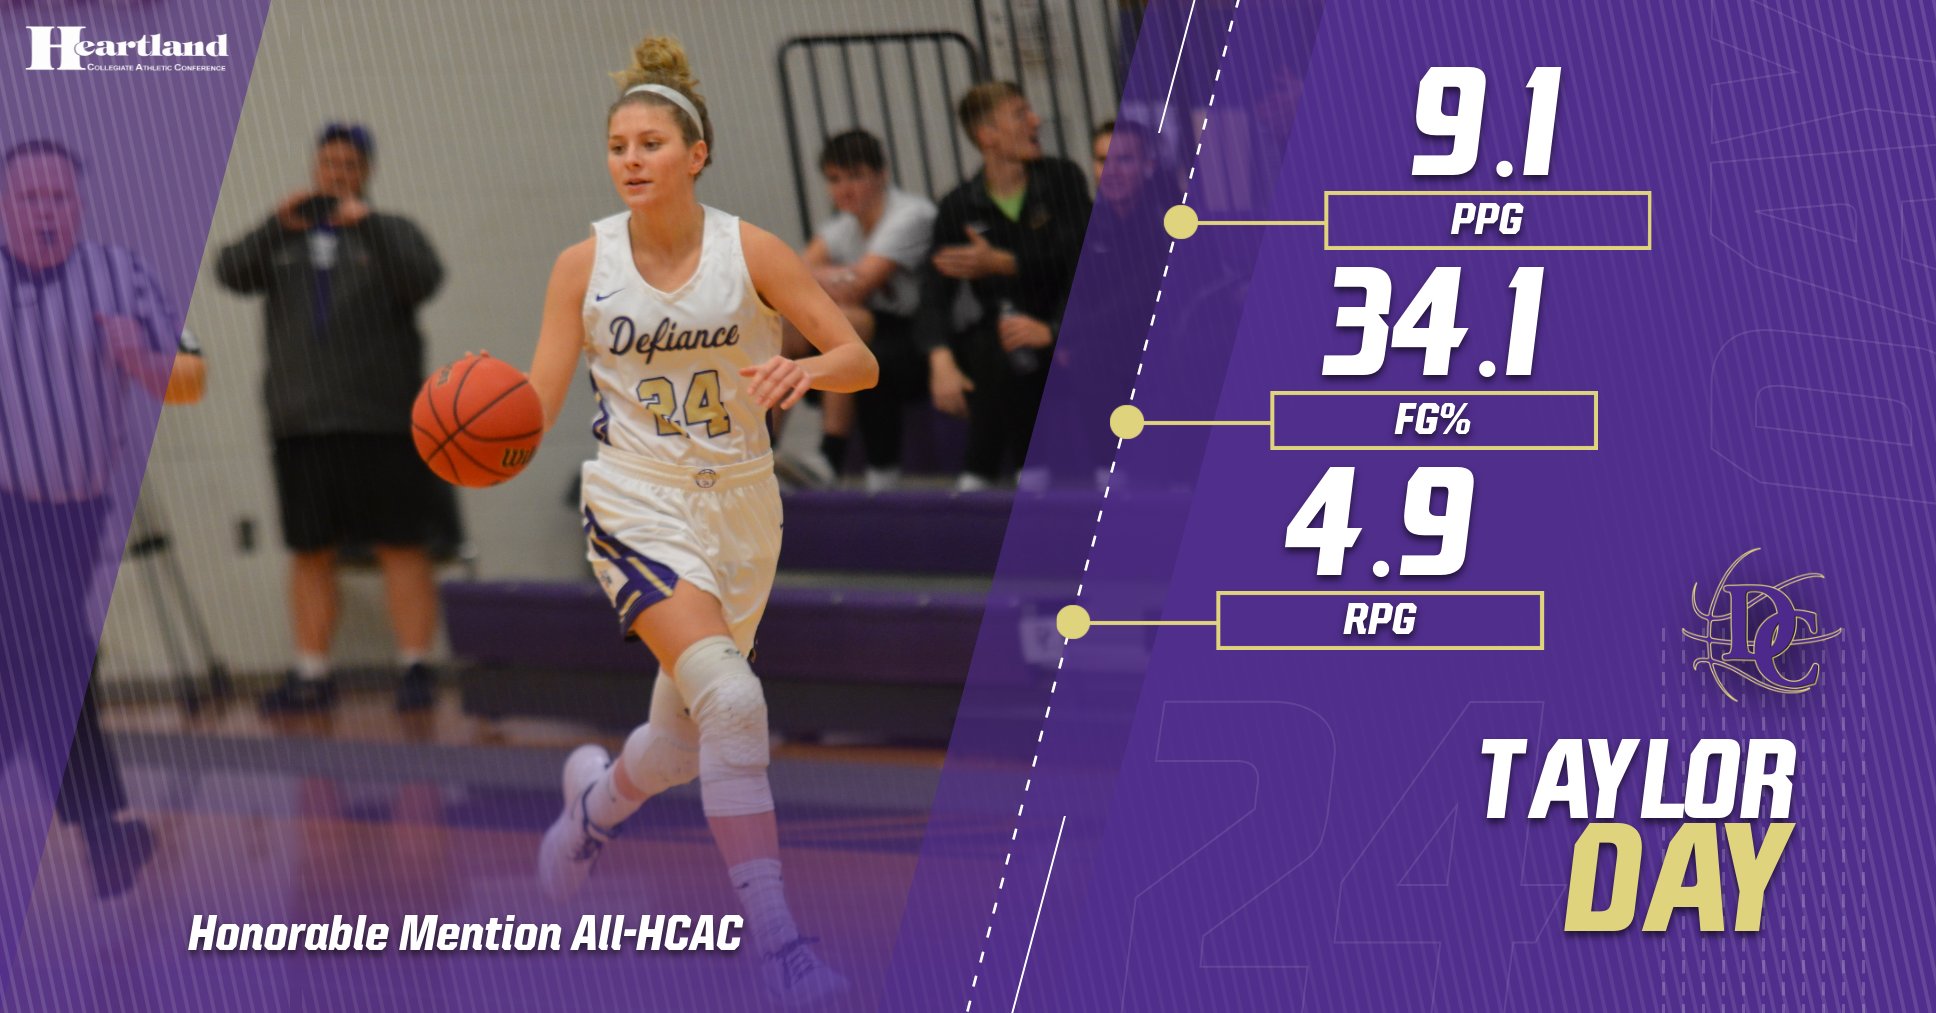 Day named Honorable Mention All-HCAC in women's basketball